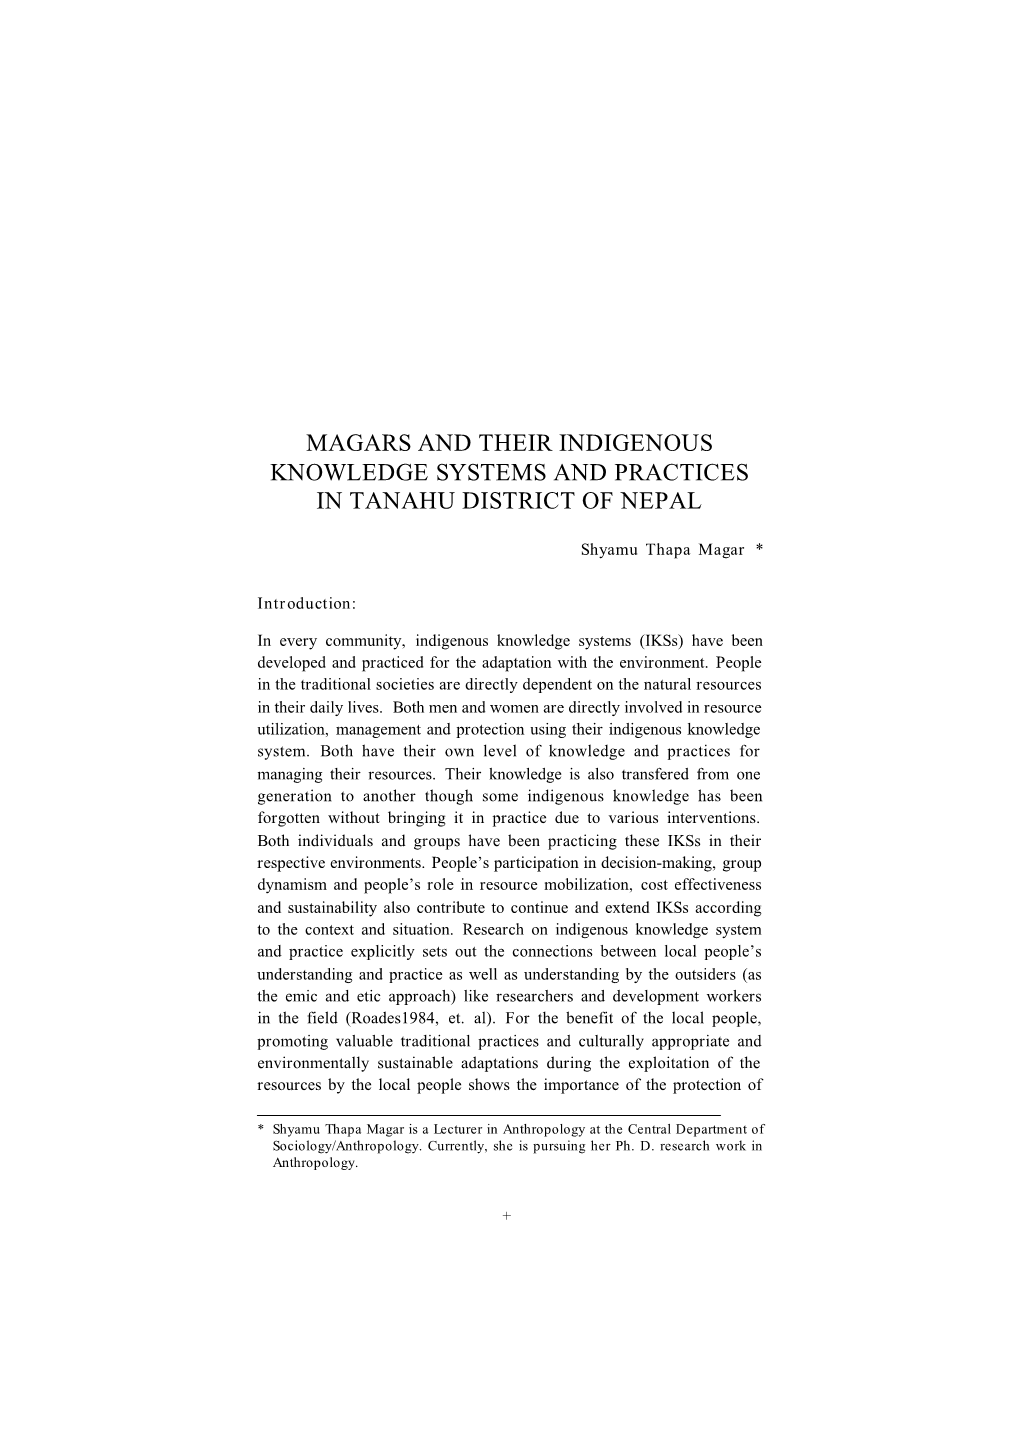 Magars and Their Indigenous Knowledge Systems and Practices in Tanahu District of Nepal